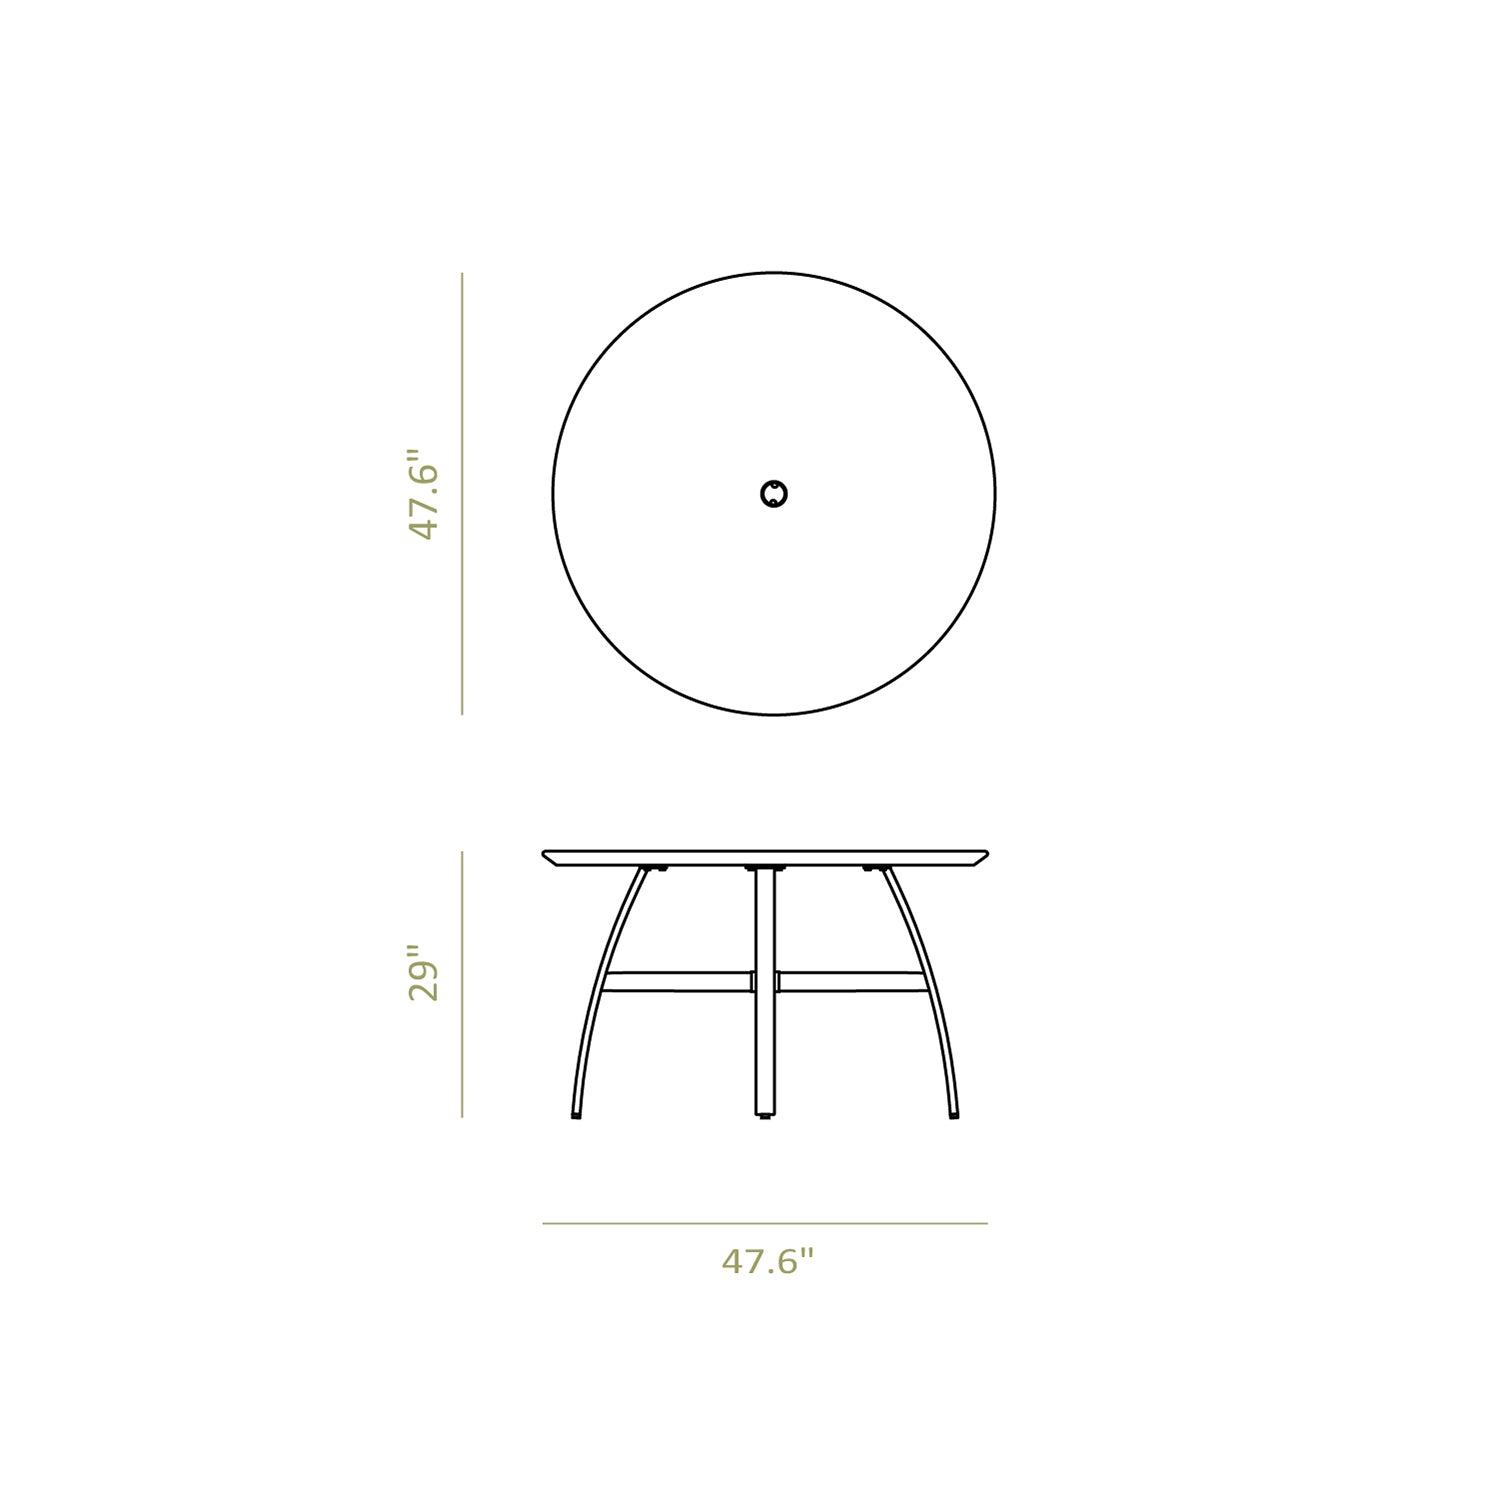 Neuwood Living Naples 48rd Dining Table Dimensions